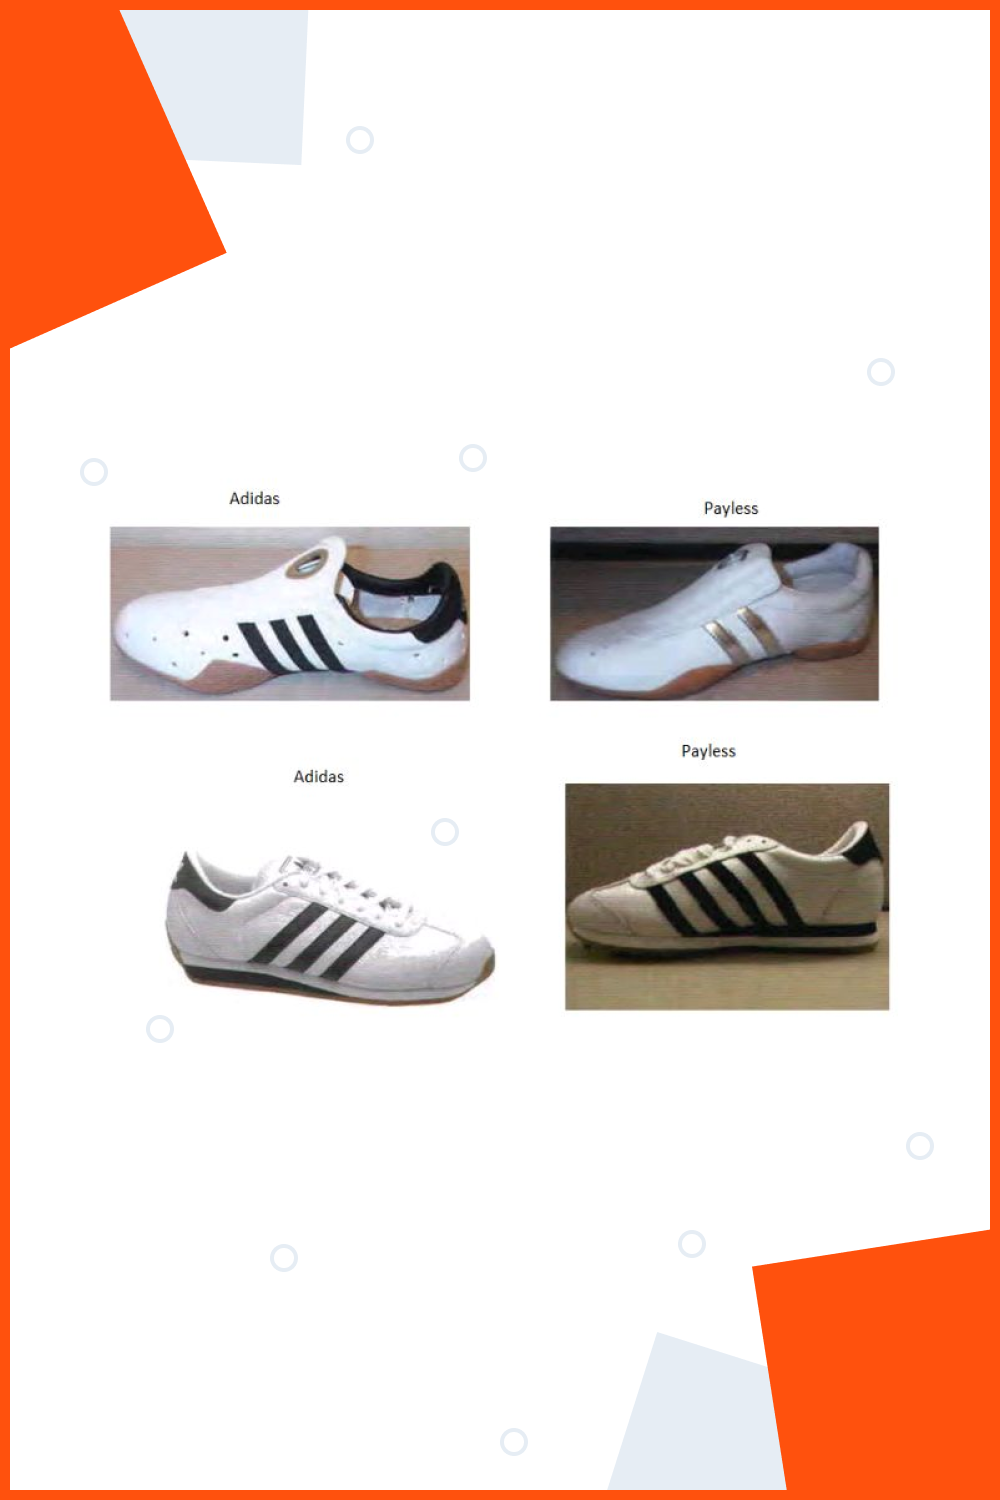 Difference between original Adidas and replica shoes.